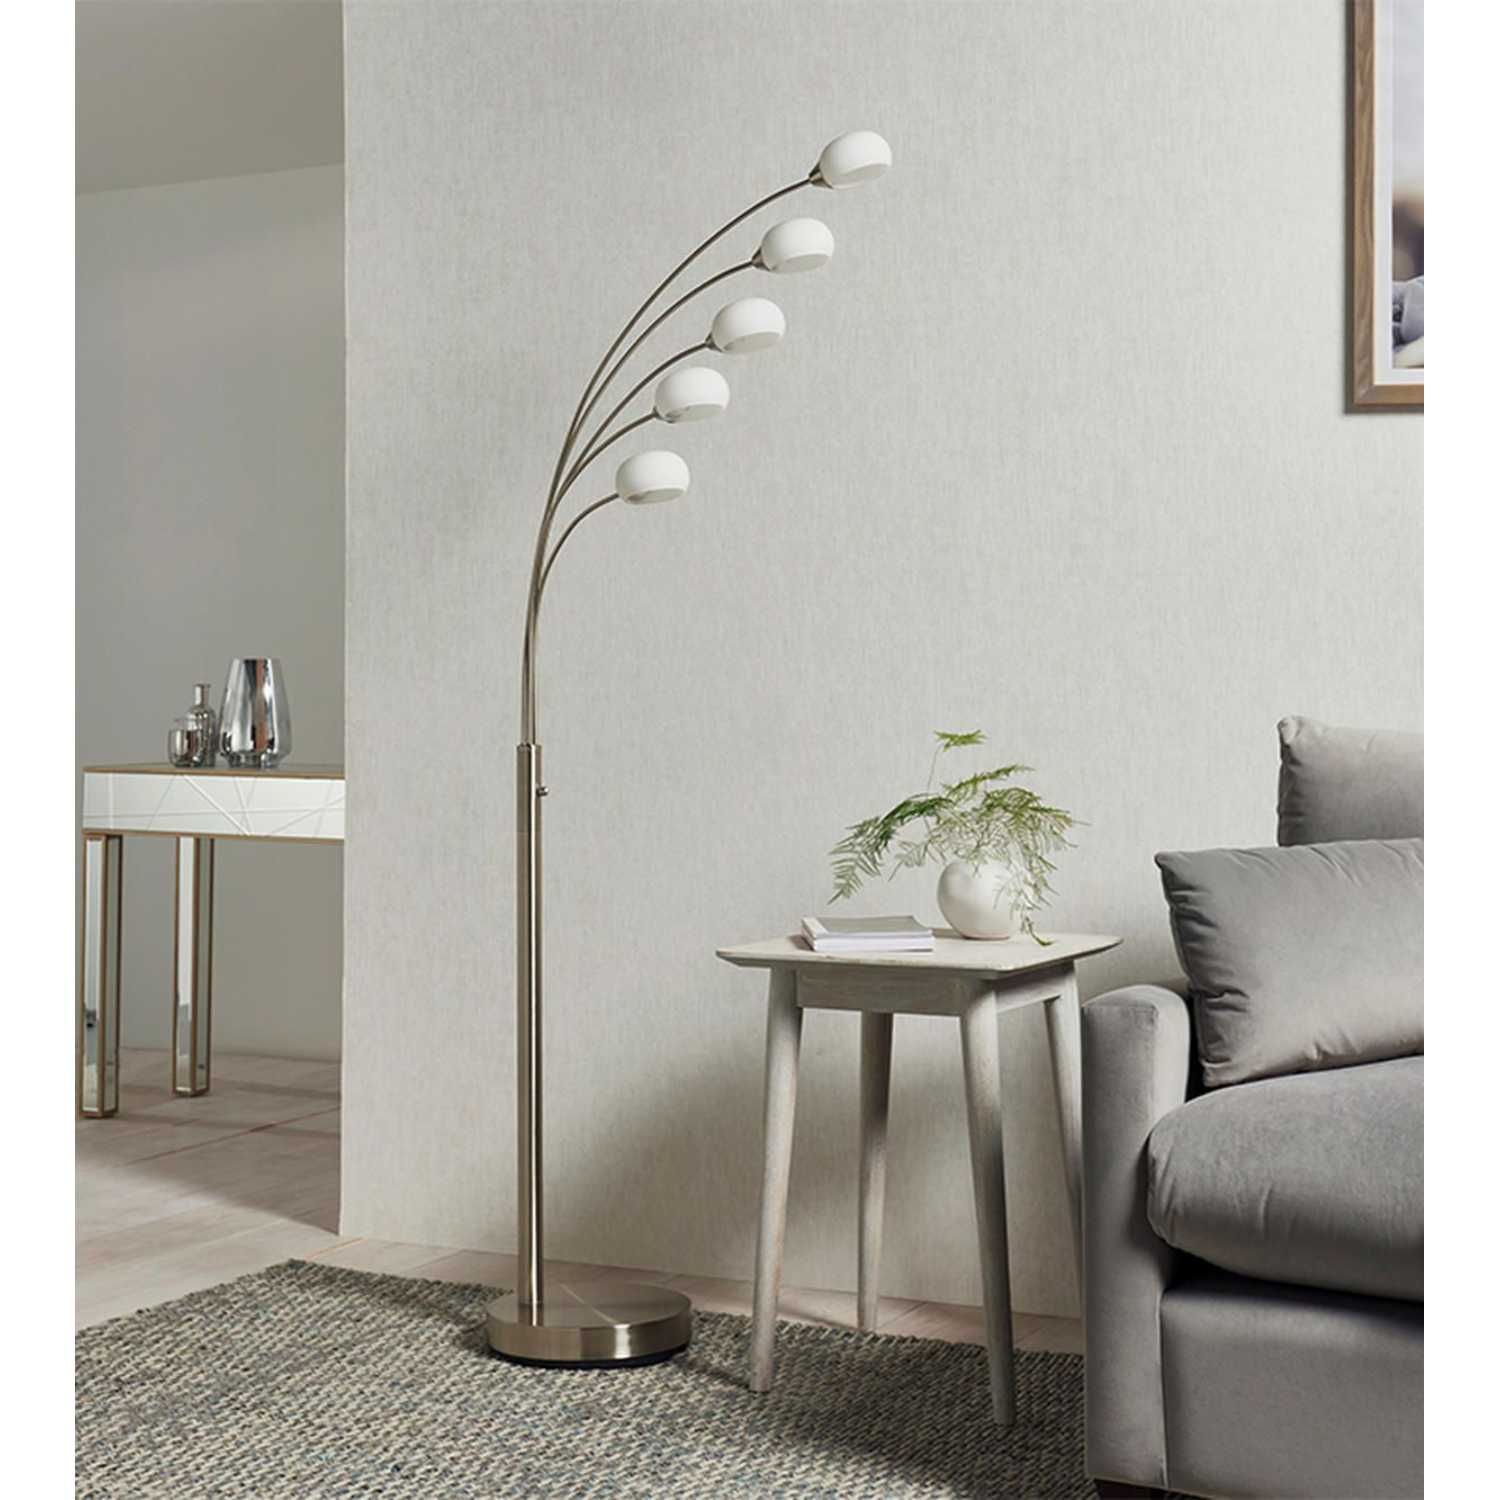 Vintage Silver Steel 5 Arm Dimmable Floor Lamp In Satin Nickel Finish With  White Glass – Cms Furniture With Regard To Silver Steel Floor Lamps (View 8 of 15)